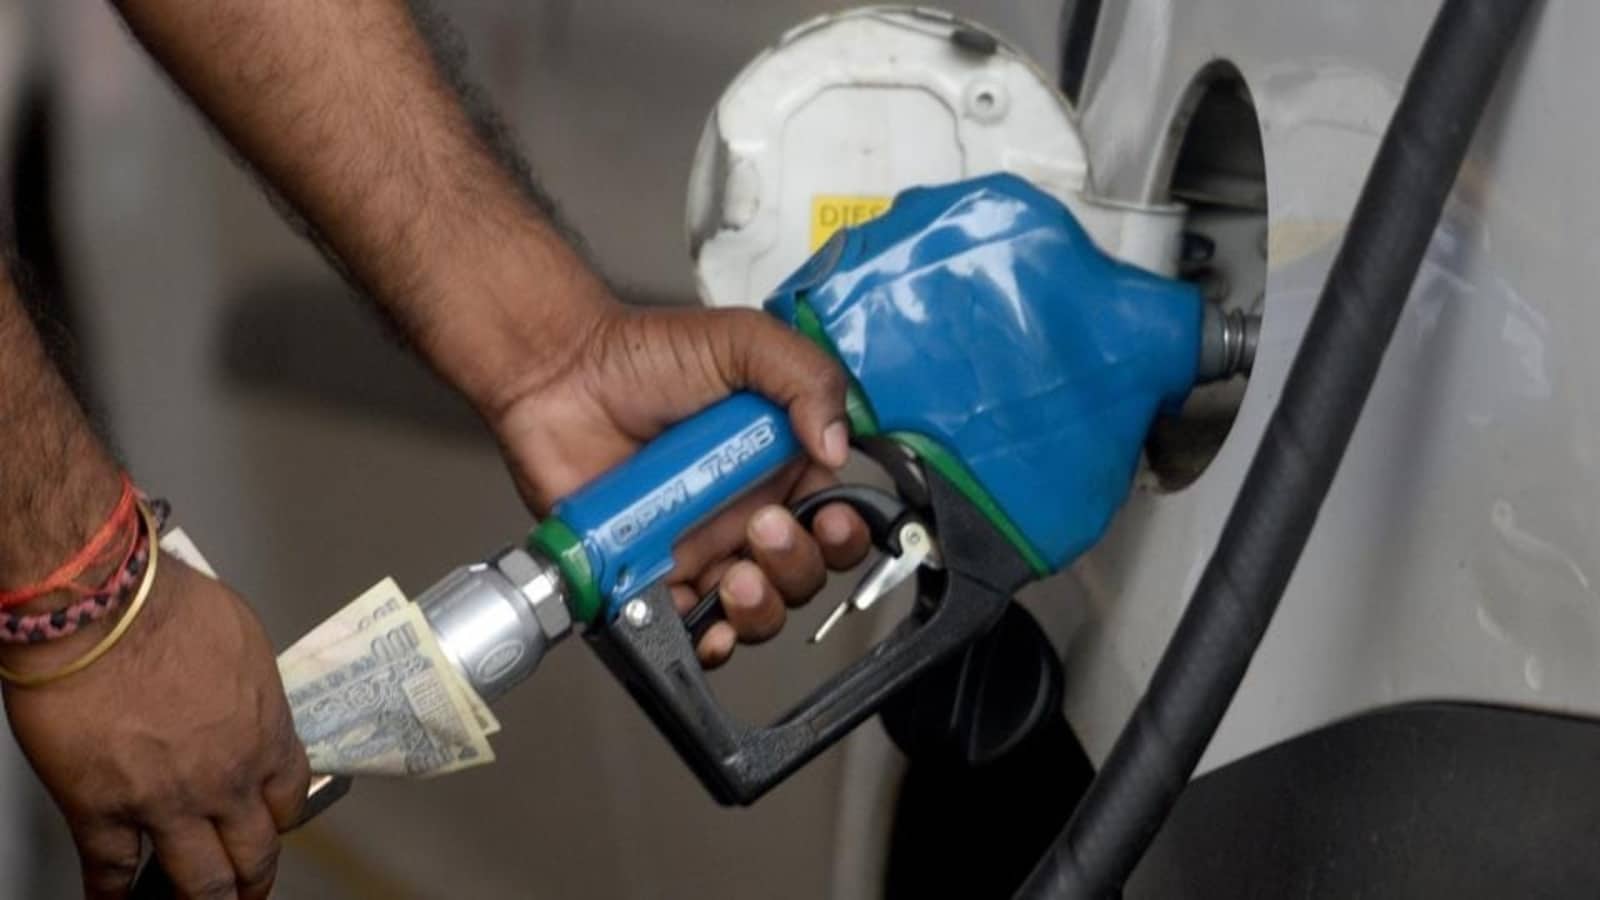 BJP leaders ‘thank’ PM Modi for excise duty cut on fuel; Oppn says ‘jumlas’